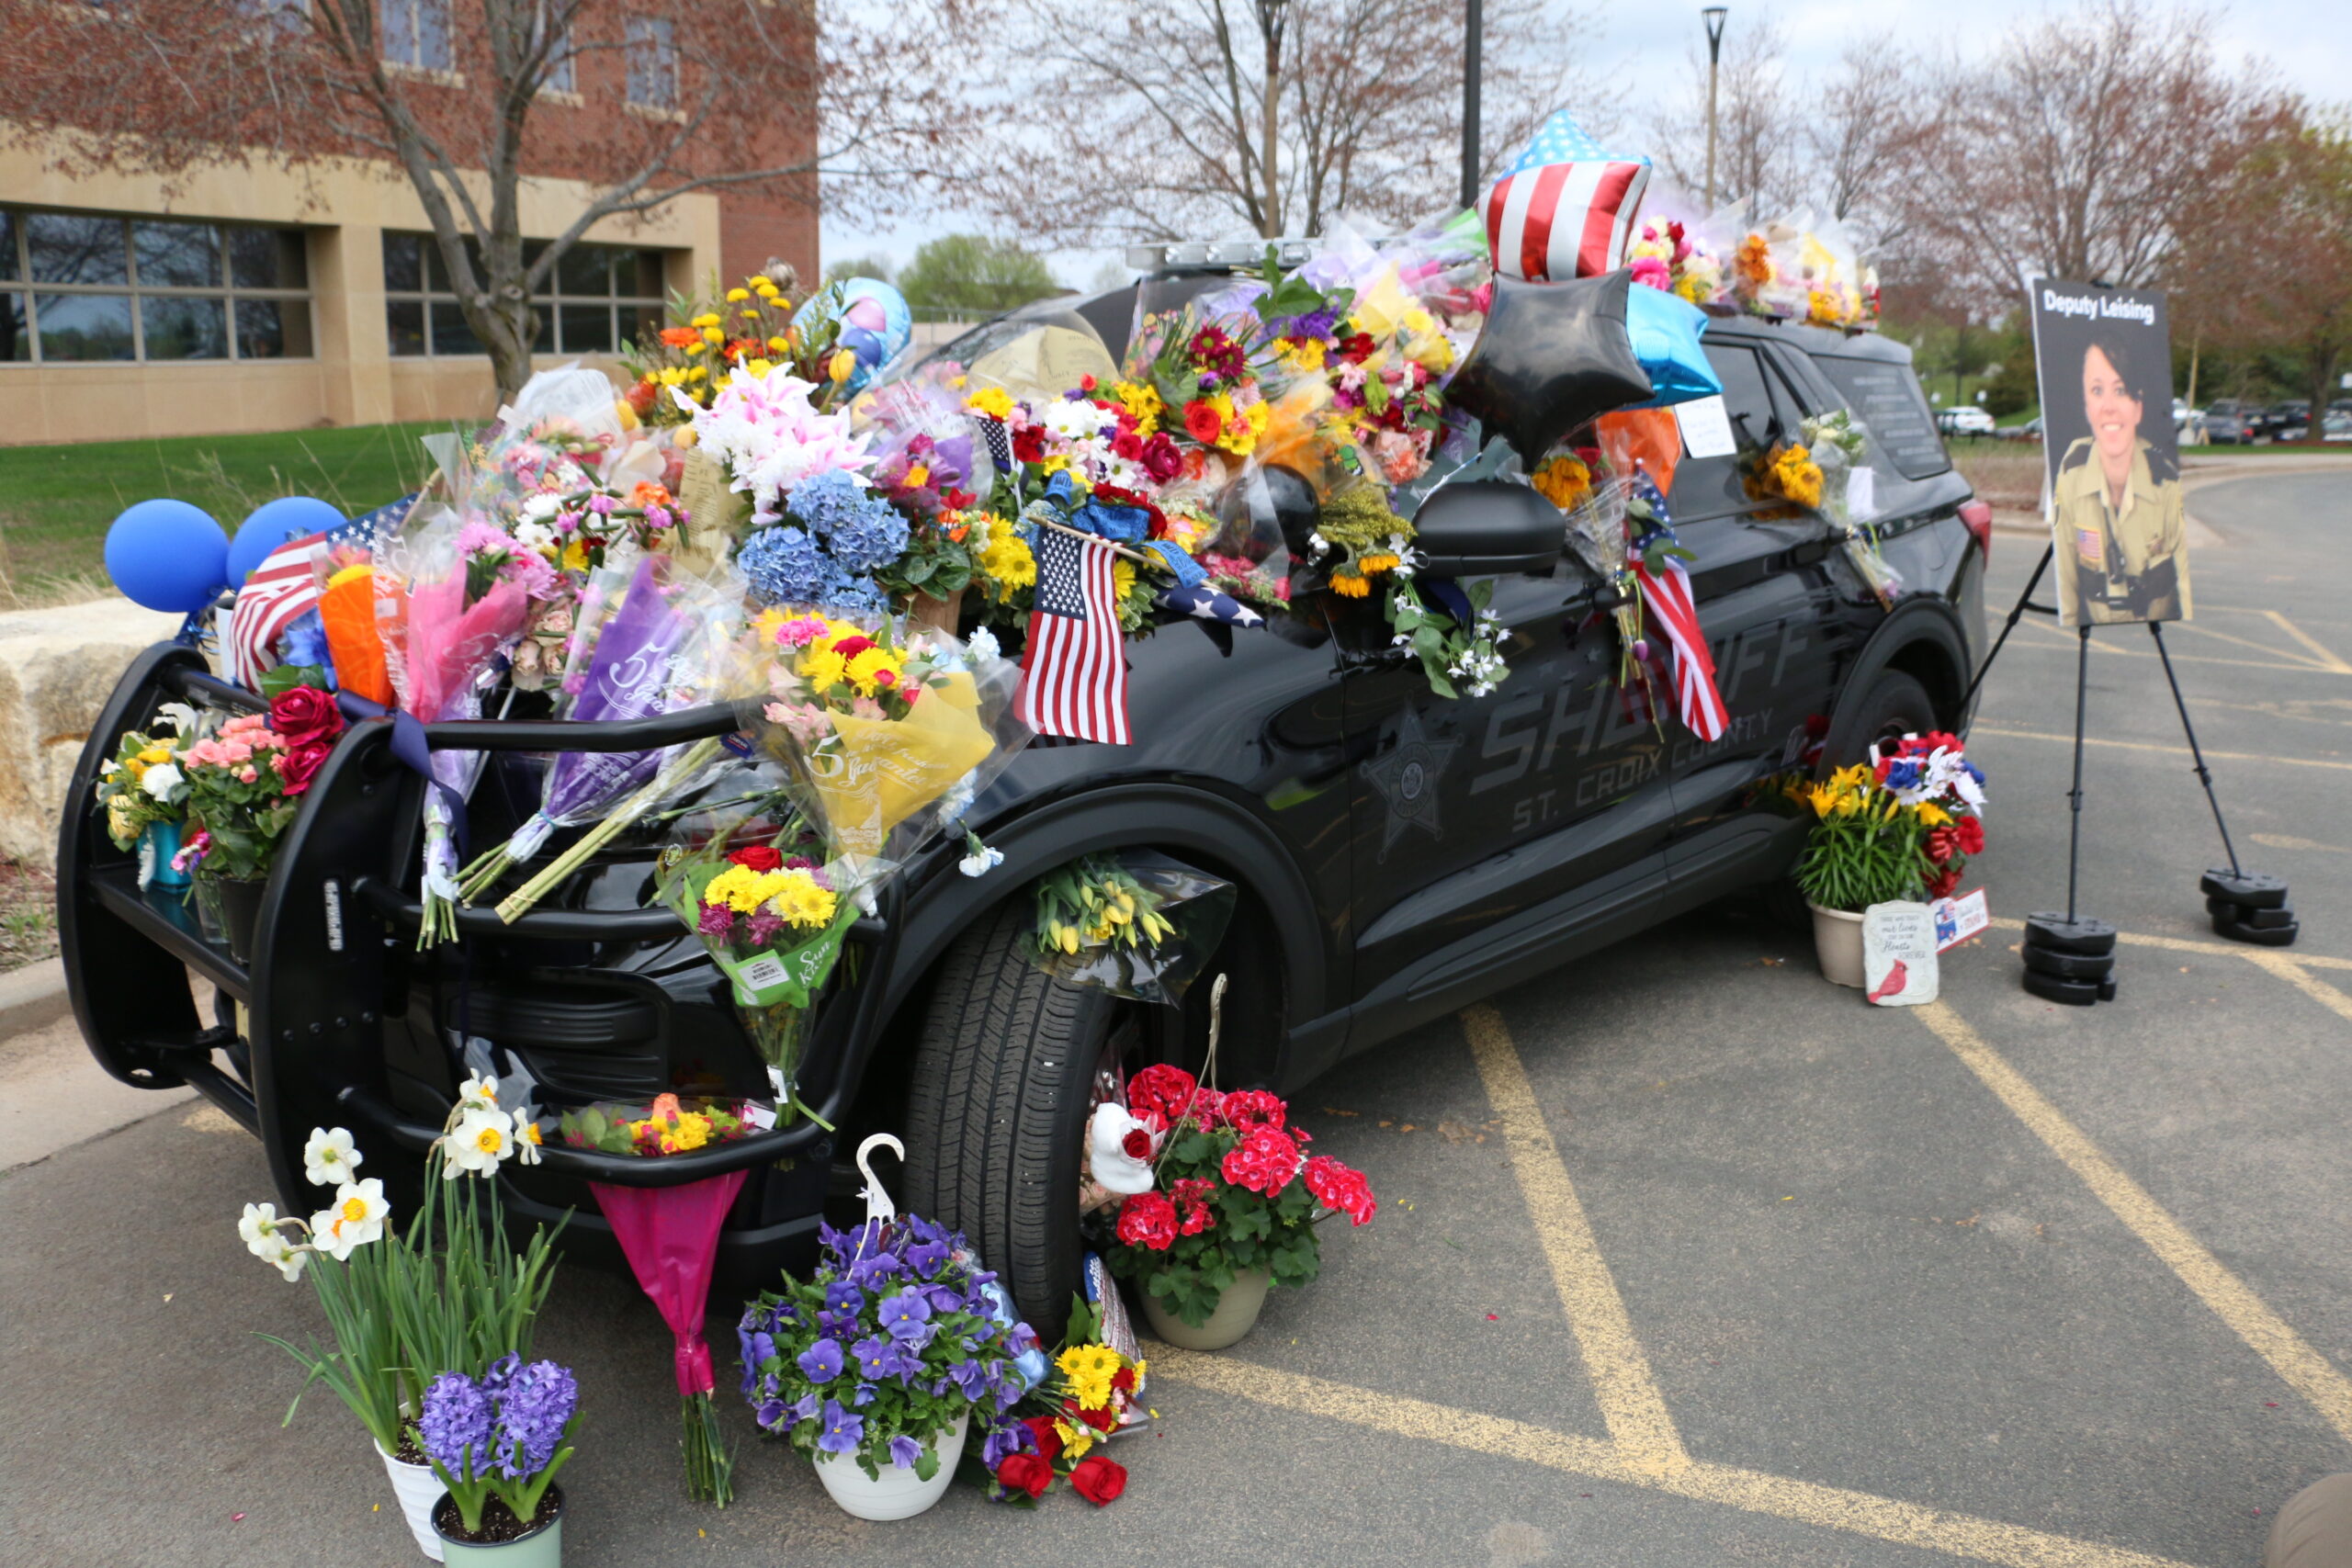 Western Wisconsin volunteers to cover shifts as St. Croix deputies mourn slain officer